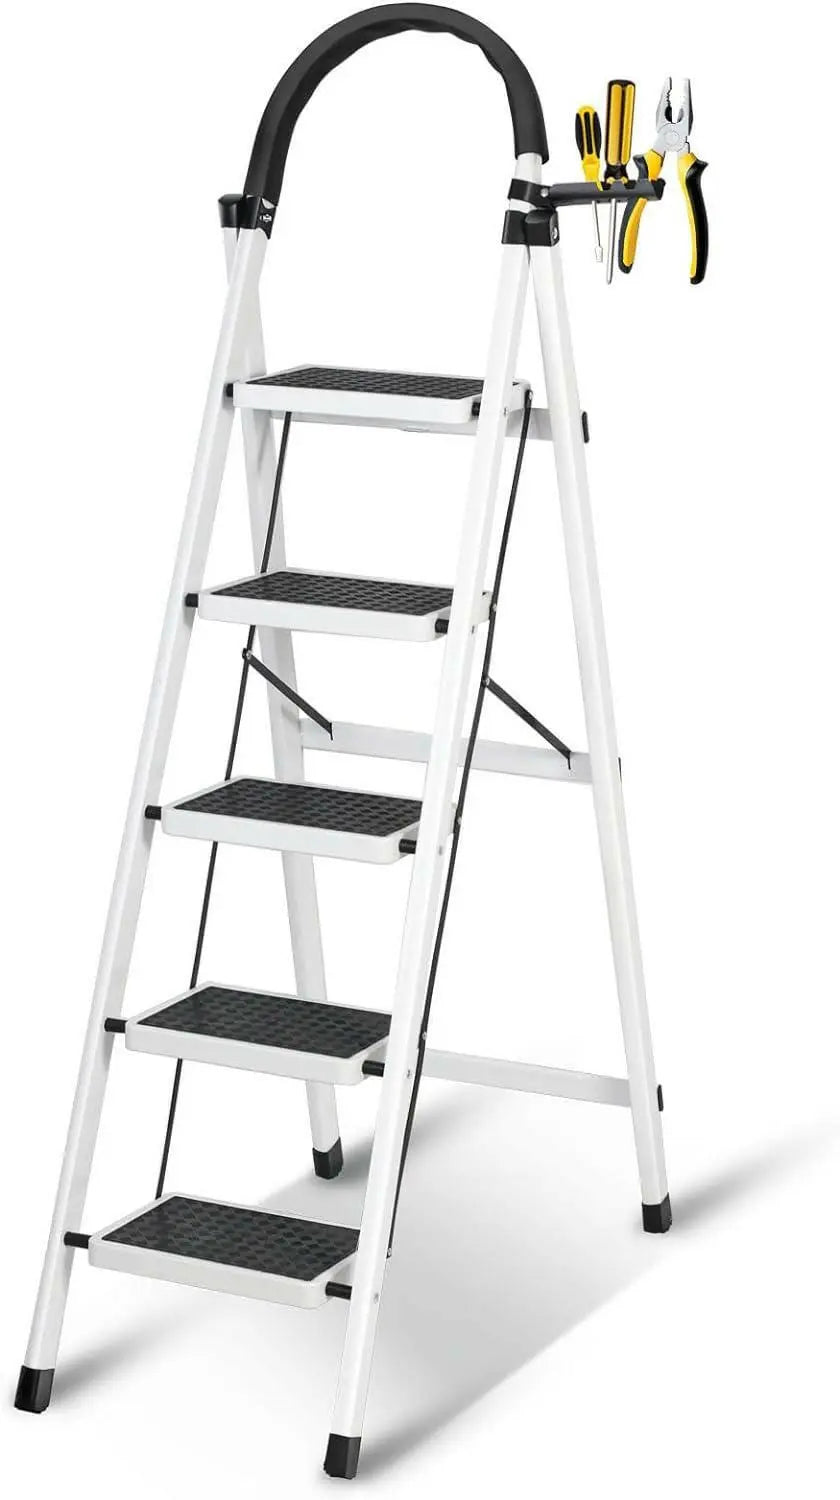 SKY-TOUCH Foldable Ladder 5 Steps, Home Ladder Folding Step Stool with Wide Anti-Slip Pedal, Adults Folding Sturdy Steel Ladder for Home,Kitchen